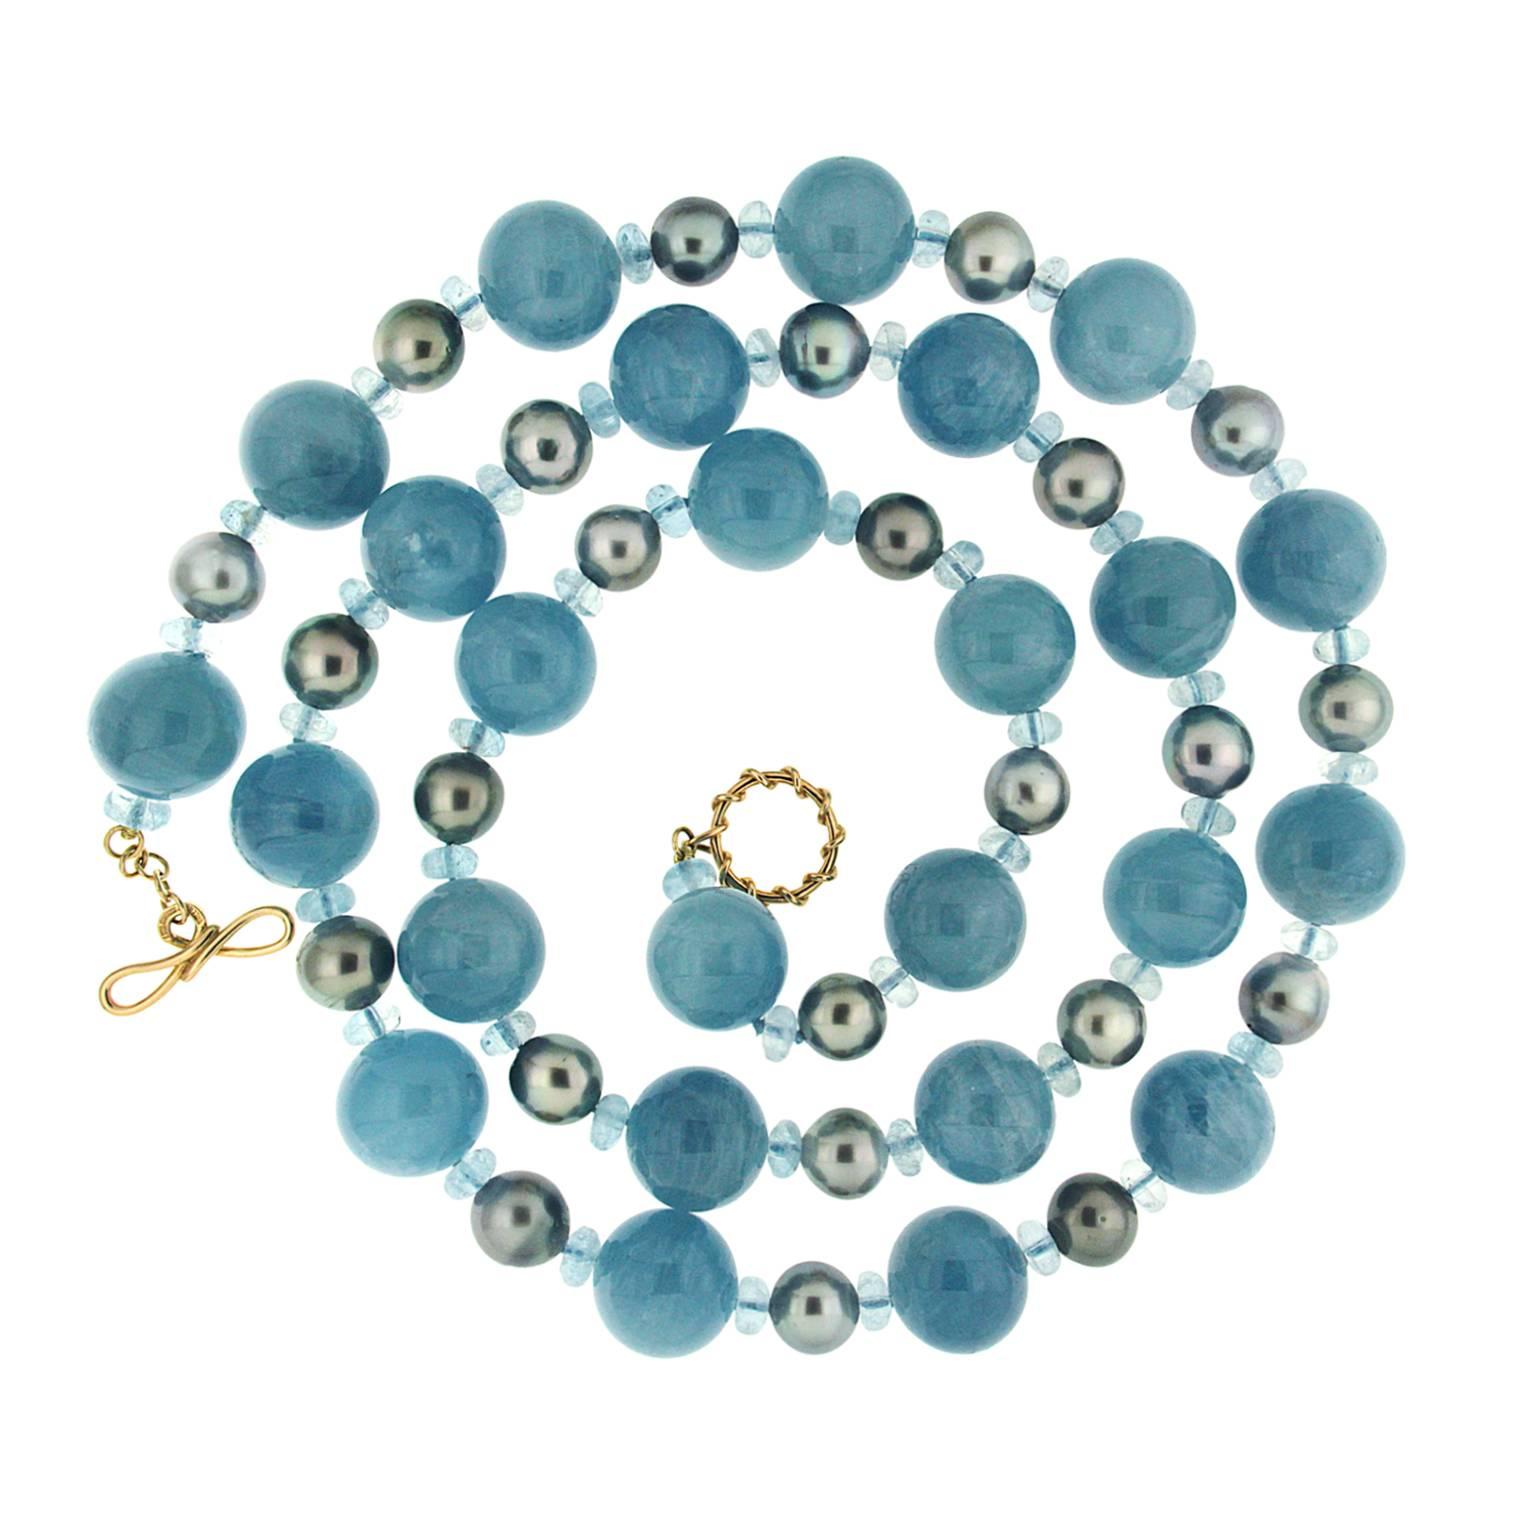 This unique necklace features twenty three 18 mm aquamarine balls with 22 Tahitian pearls  and 7mm aquamarine roundels. The necklace is finished in 18kt yellow gold with Medium plain knot with wire link toggle.